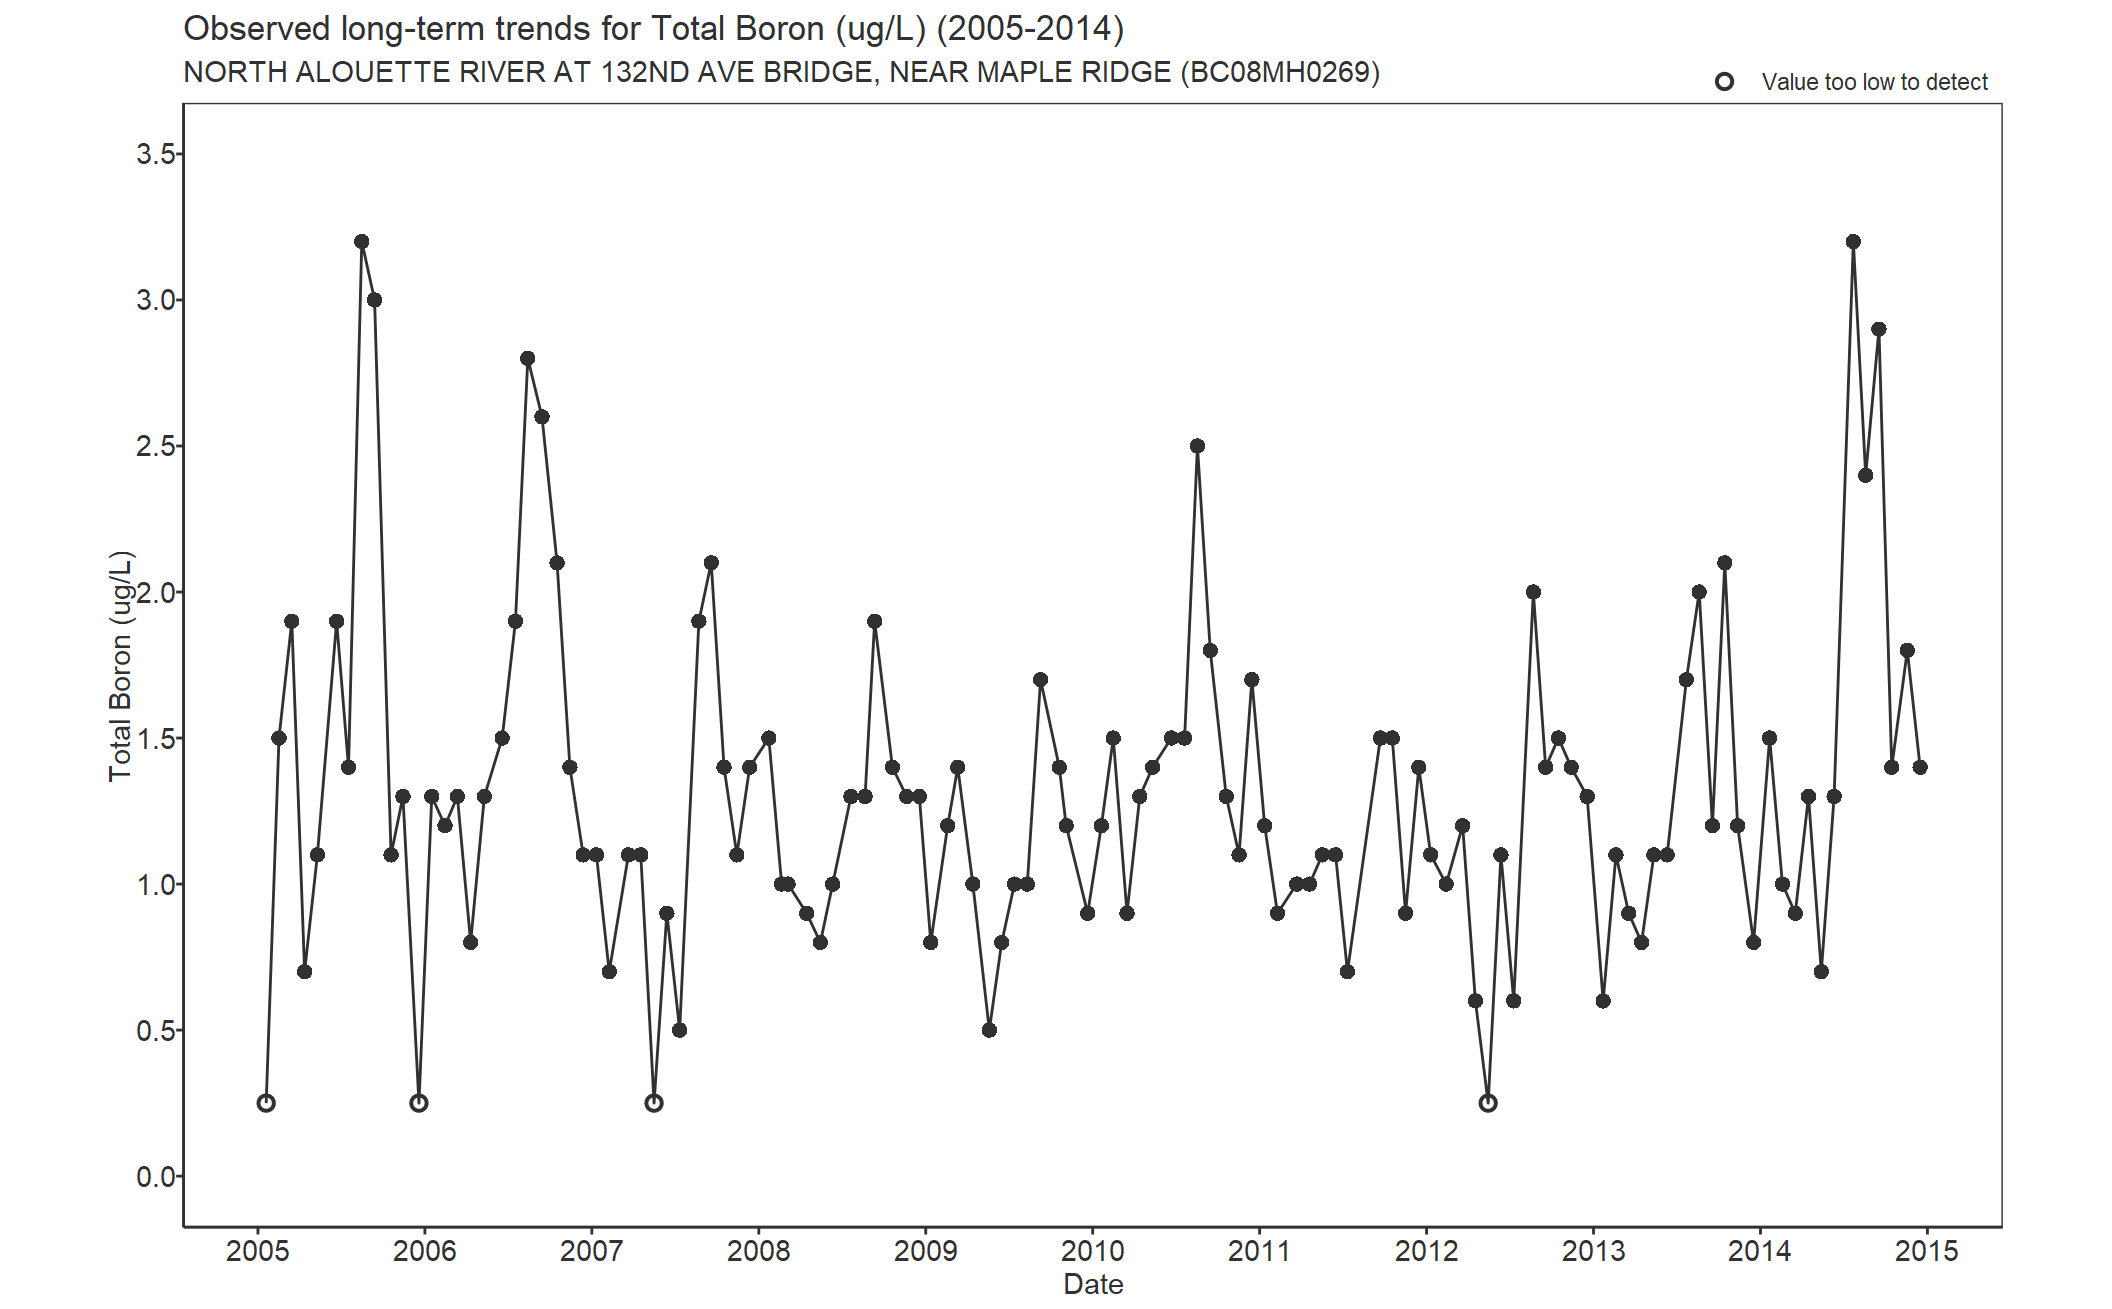 Observed long-term trends for Boron Total (2005-2014)